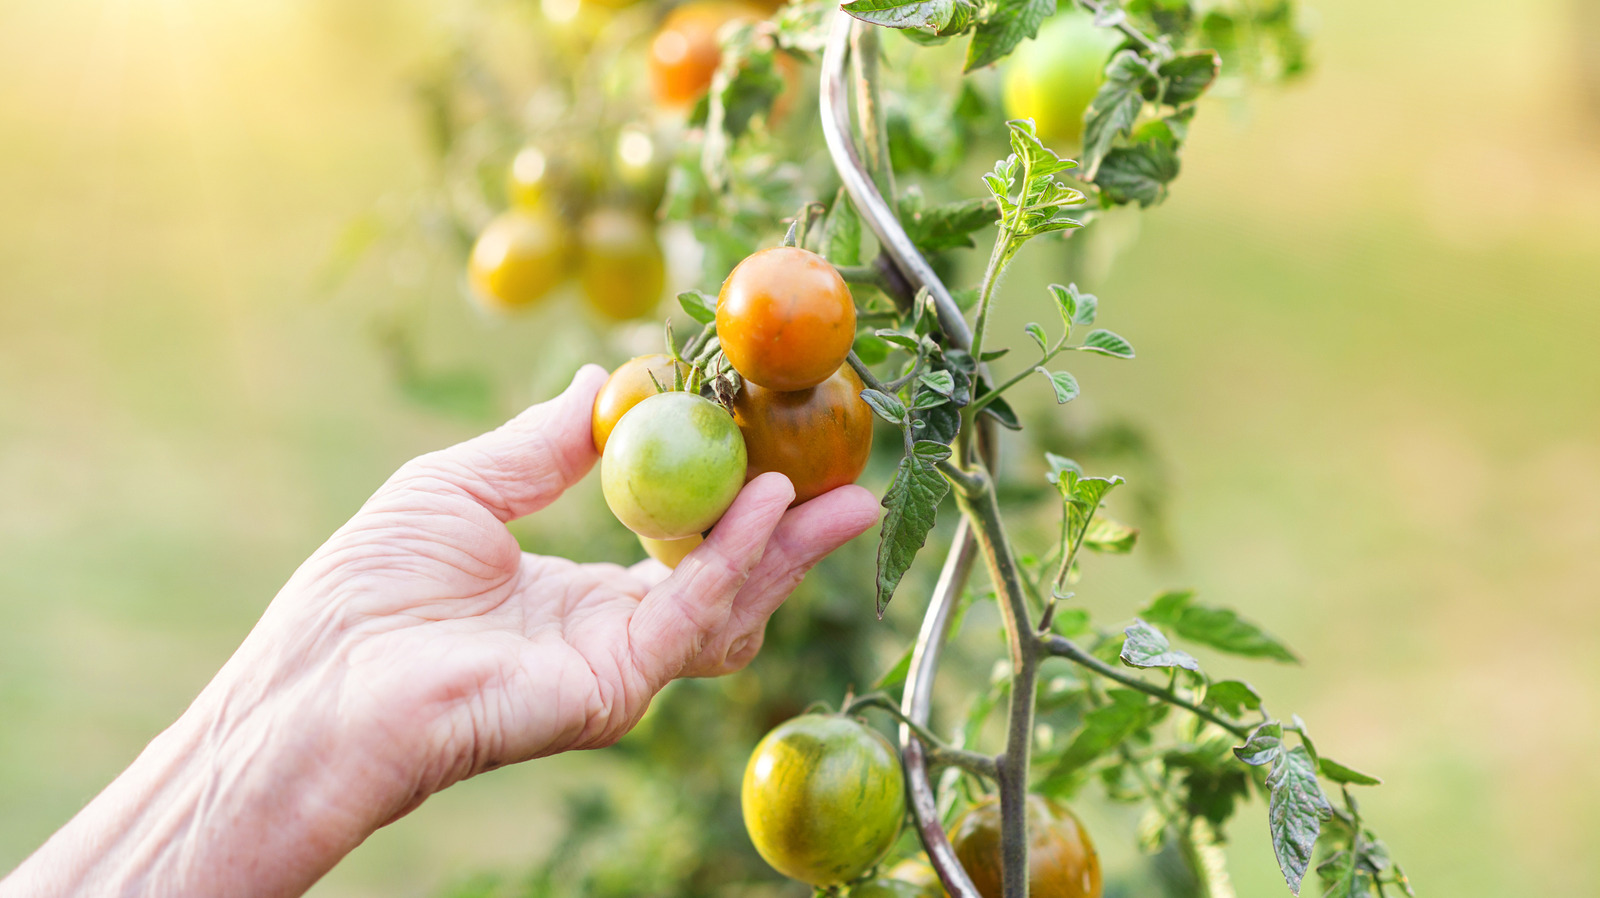 Want to plant tomatoes? Here's how to time them just right